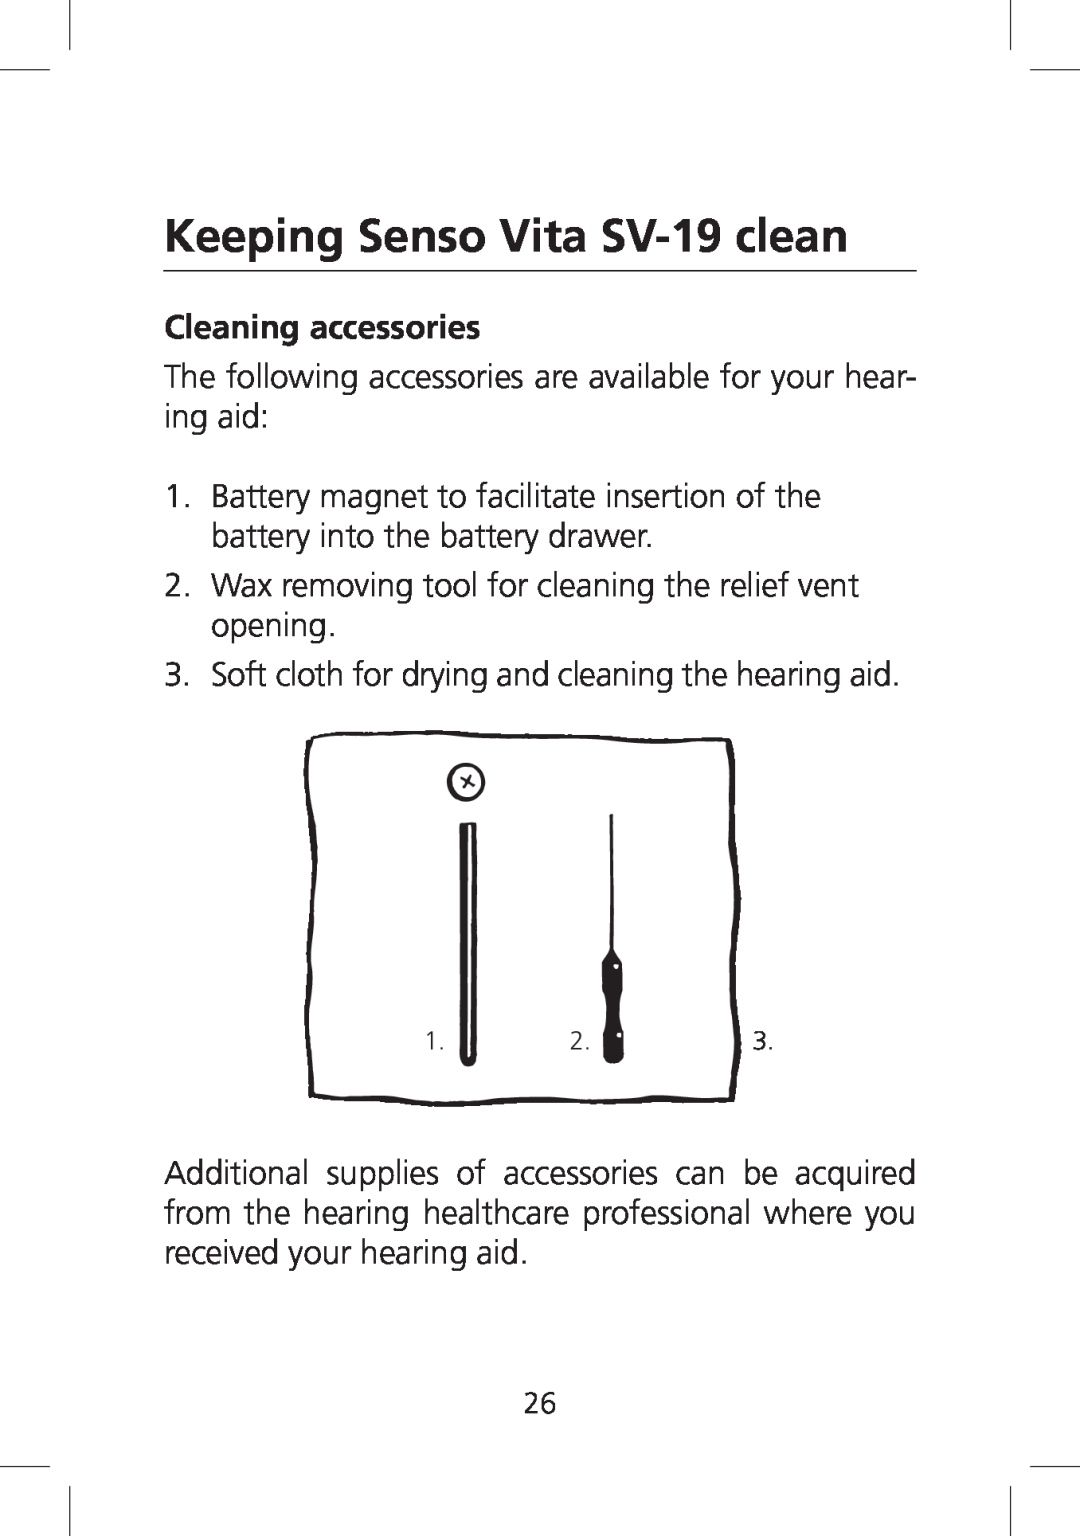 SV Sound manual Keeping Senso Vita SV-19 clean, Cleaning accessories 